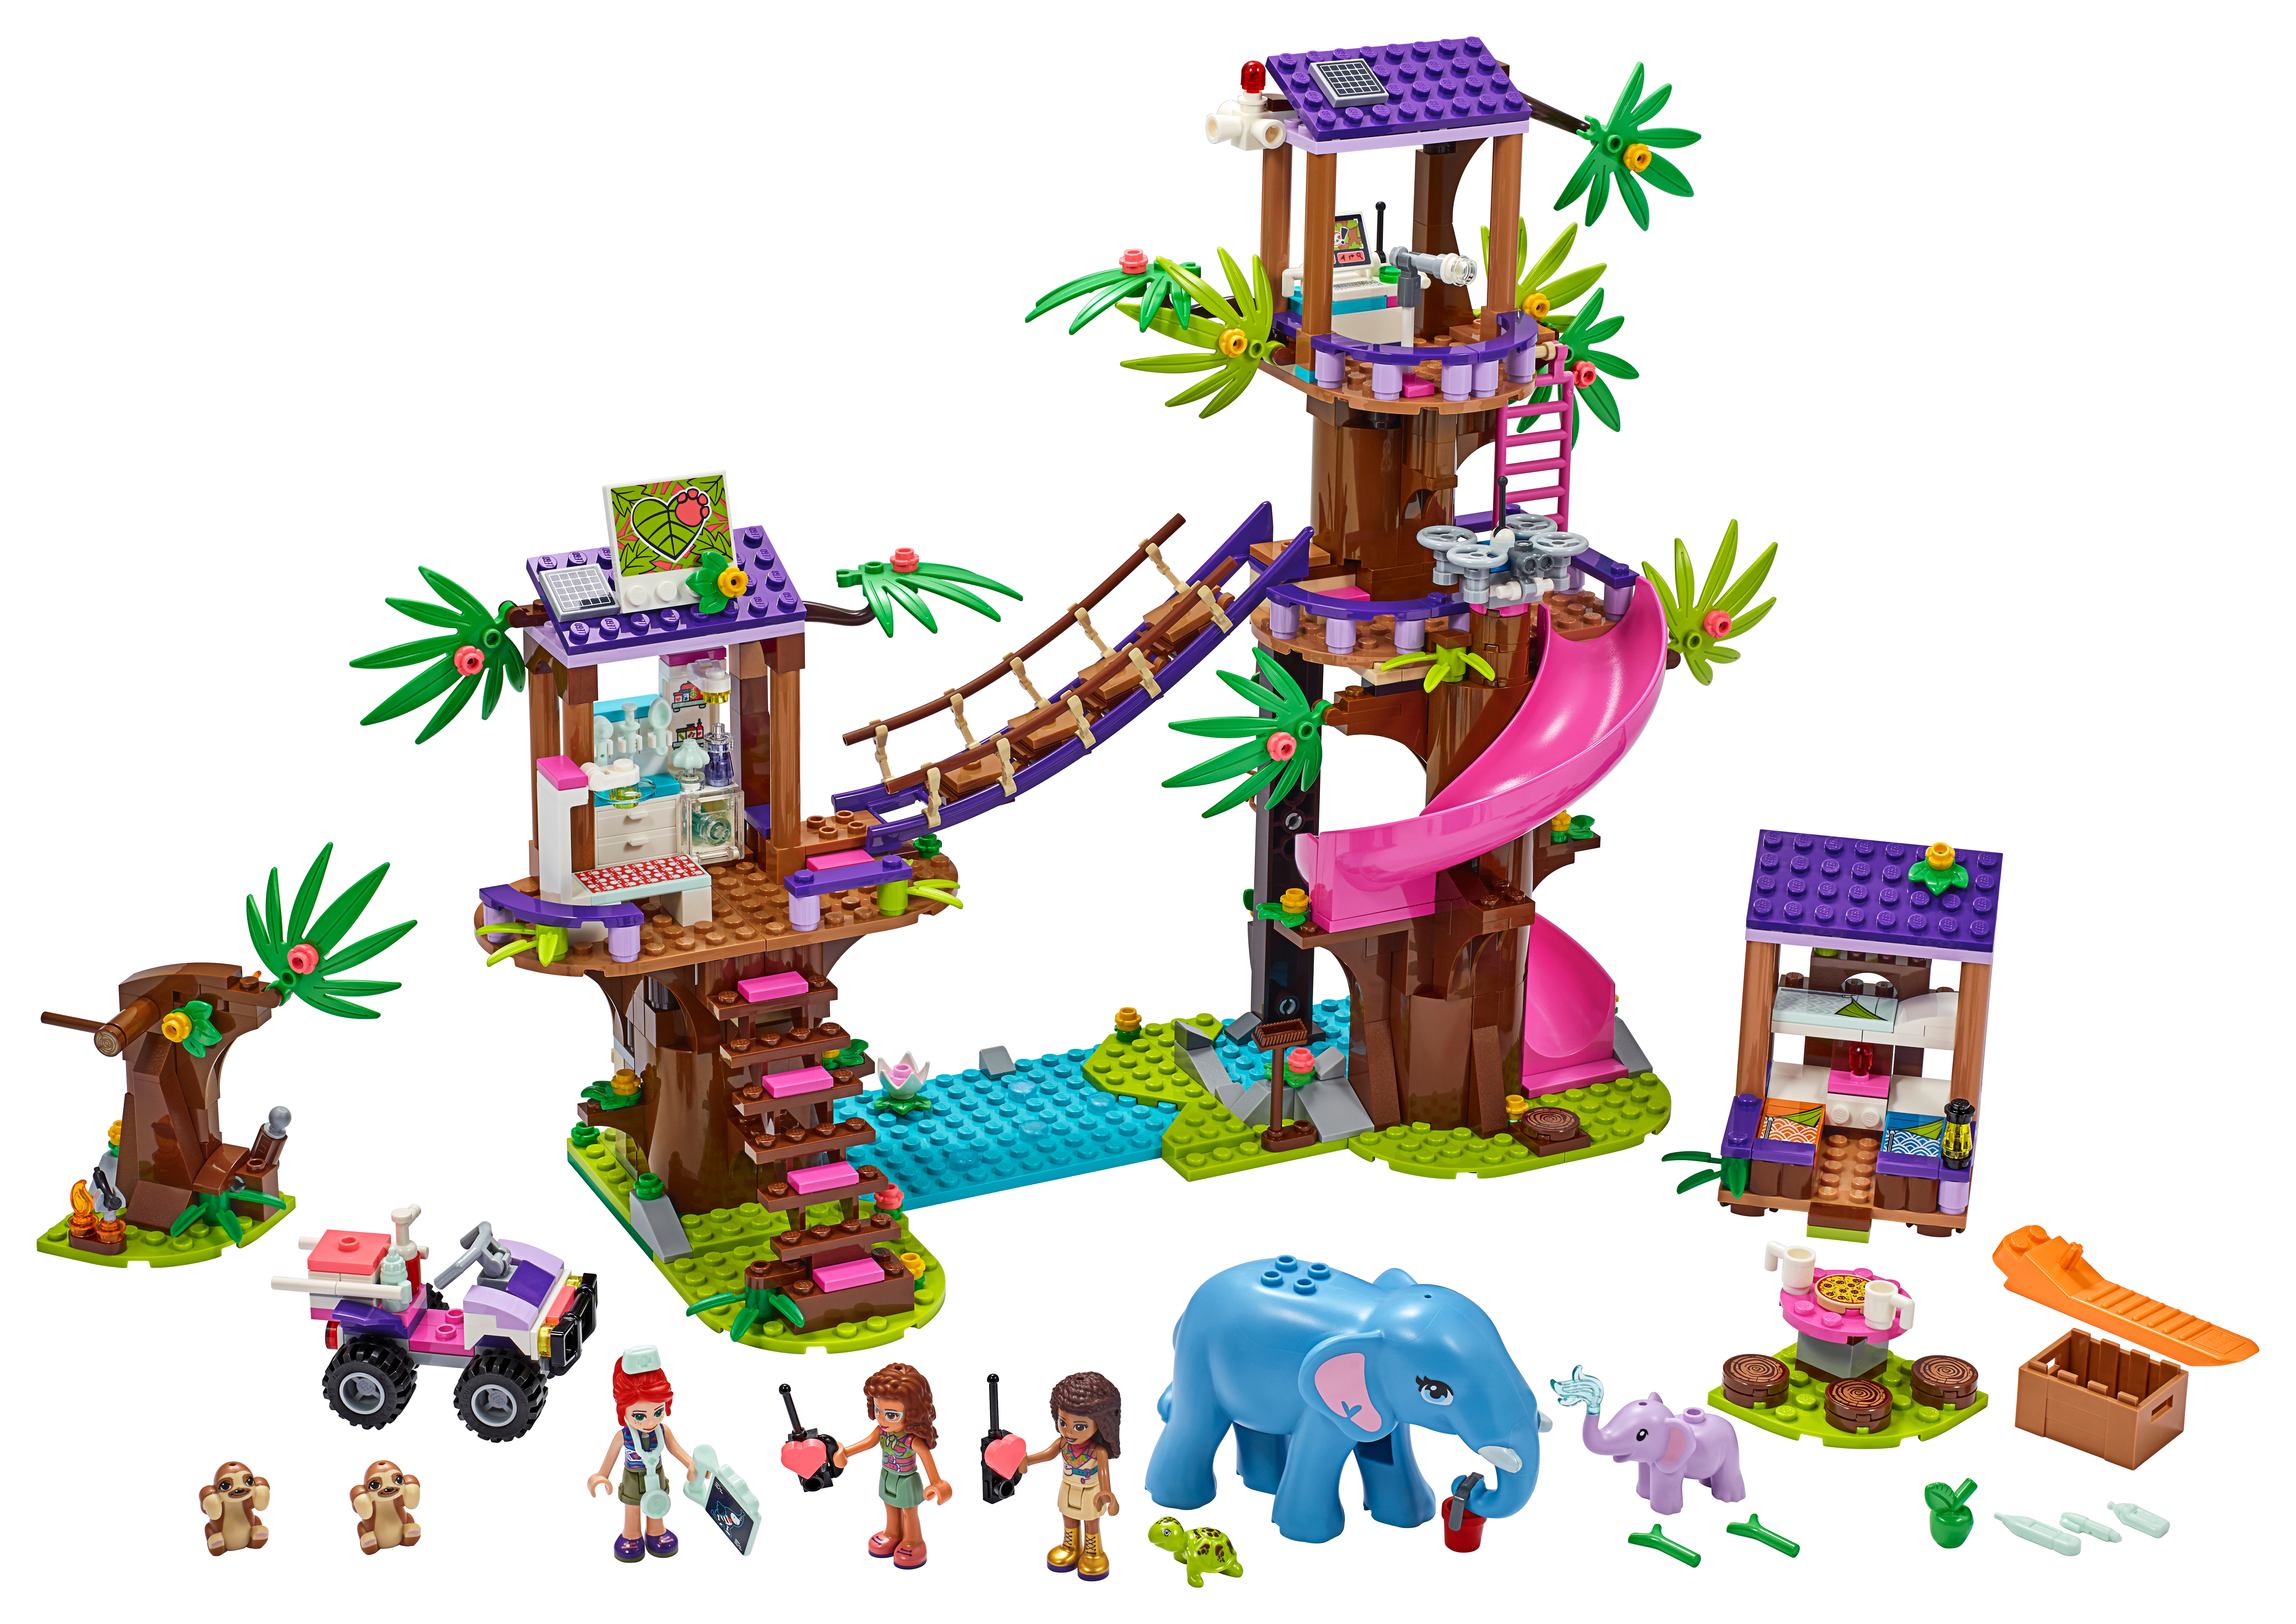 where to buy friends lego set